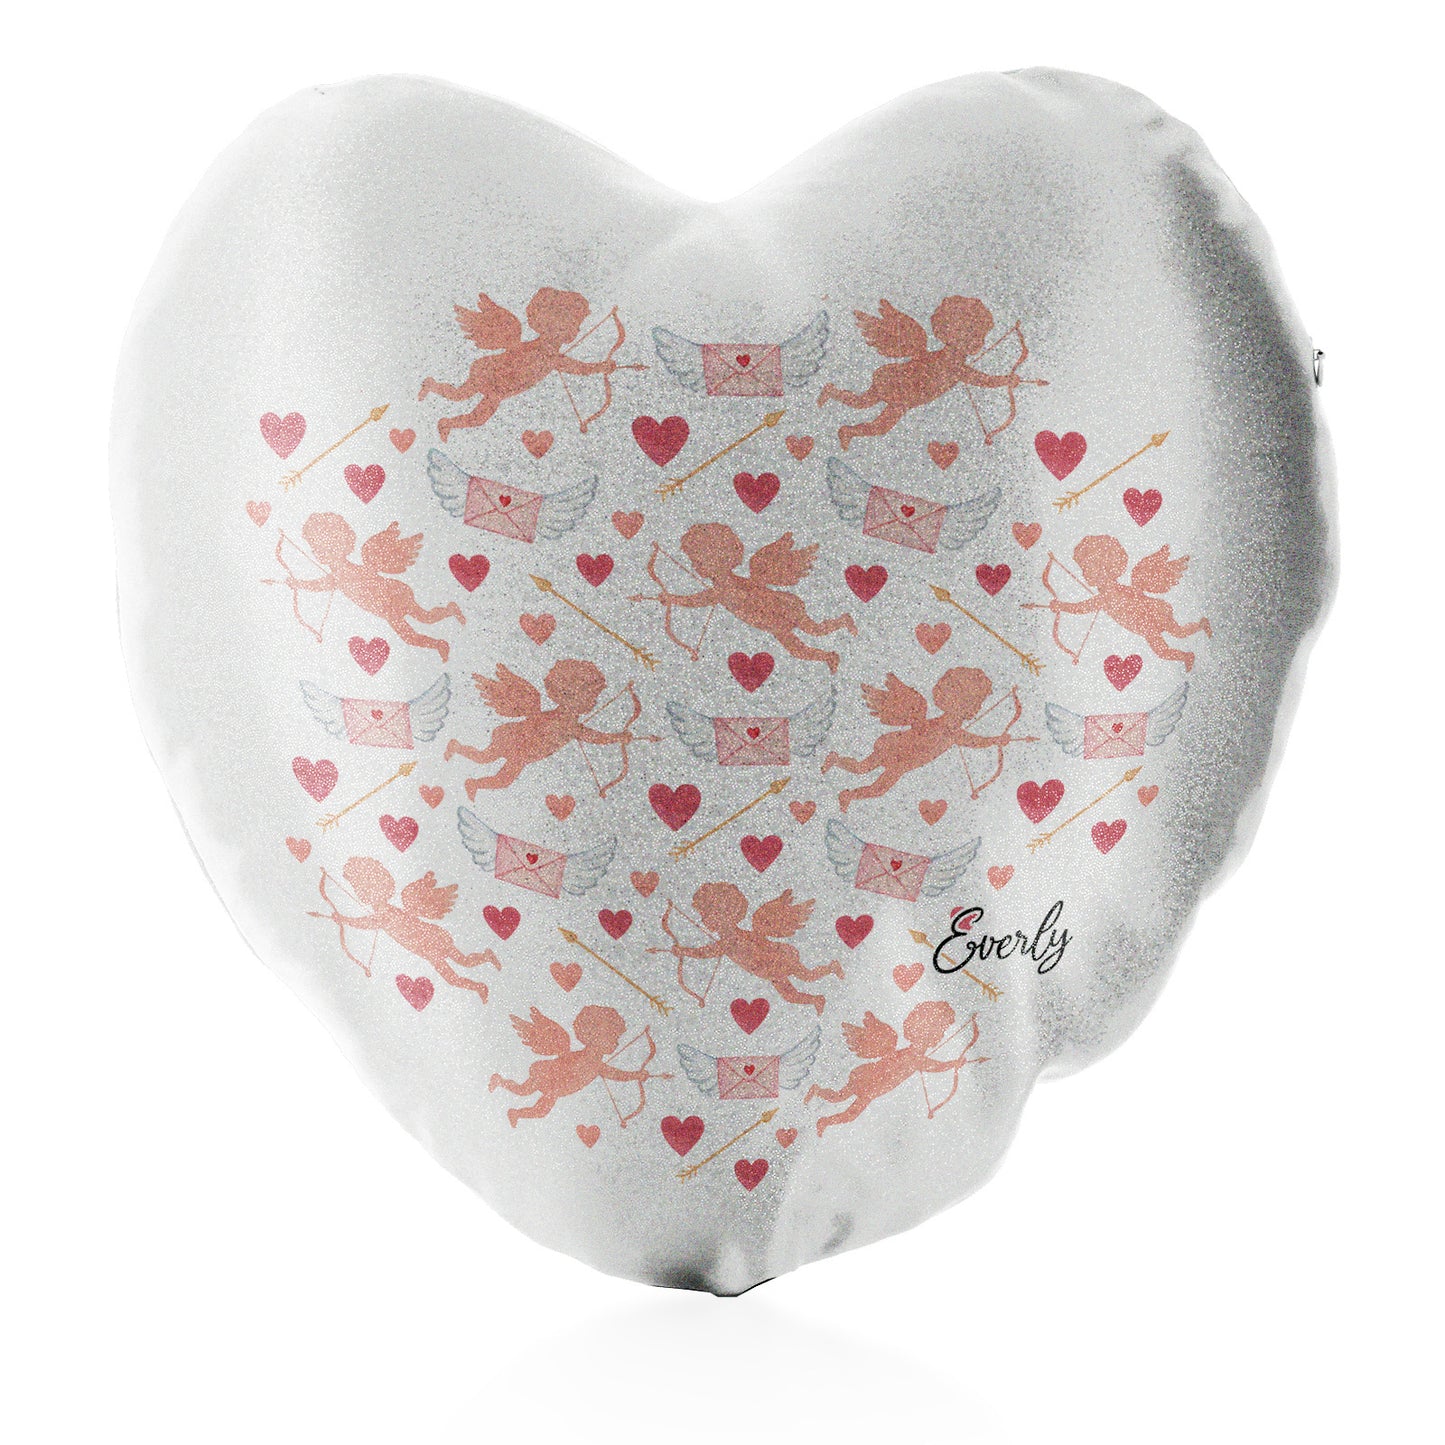 Personalised Glitter Heart Cushion with Stylish Text and Cupid Hearts Print